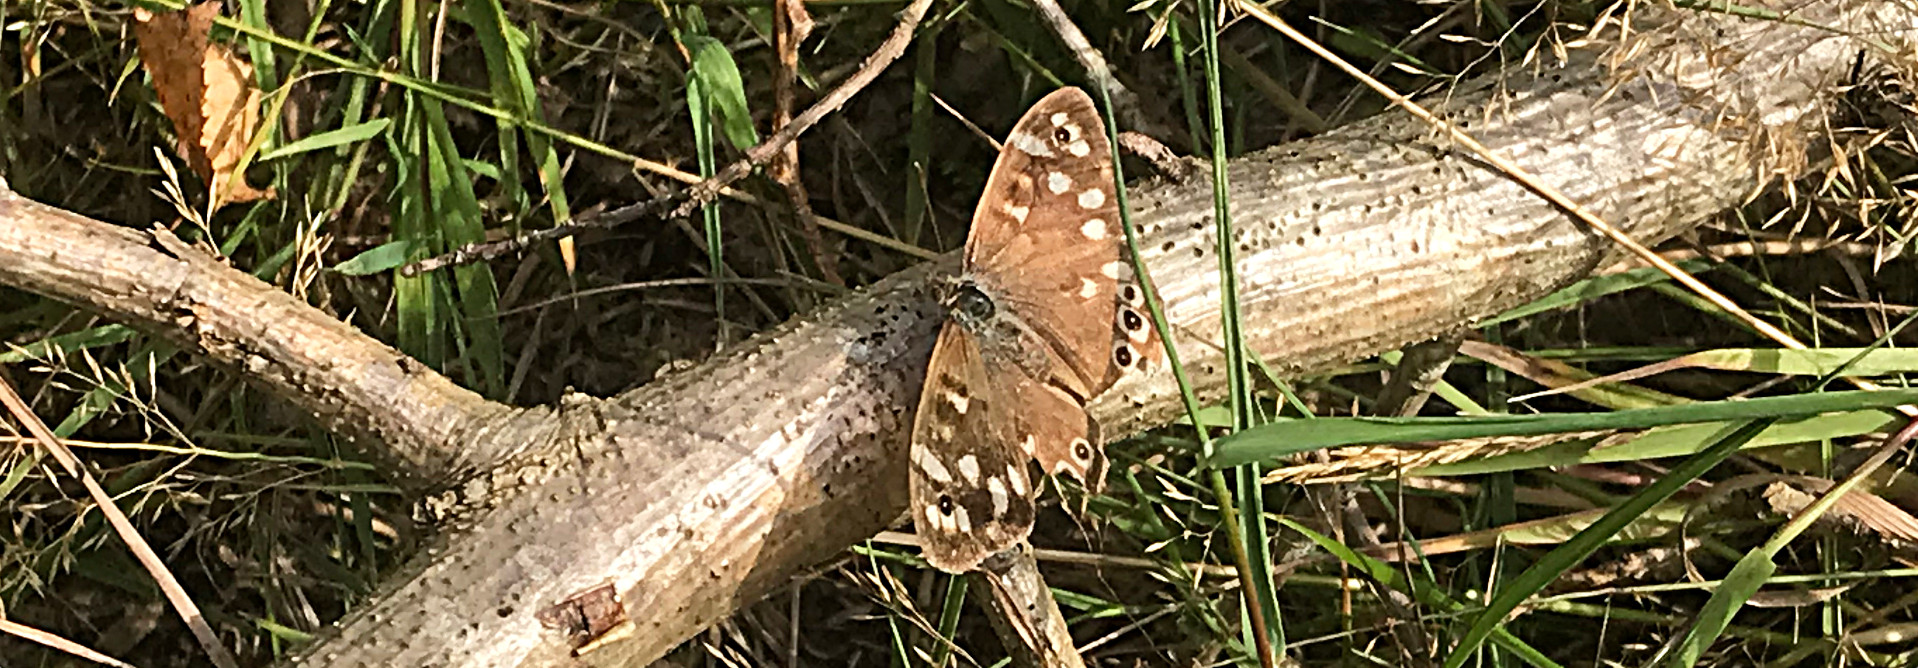 A Speckled Wood Butterfly on a stick in the National Forest near Hartshorne